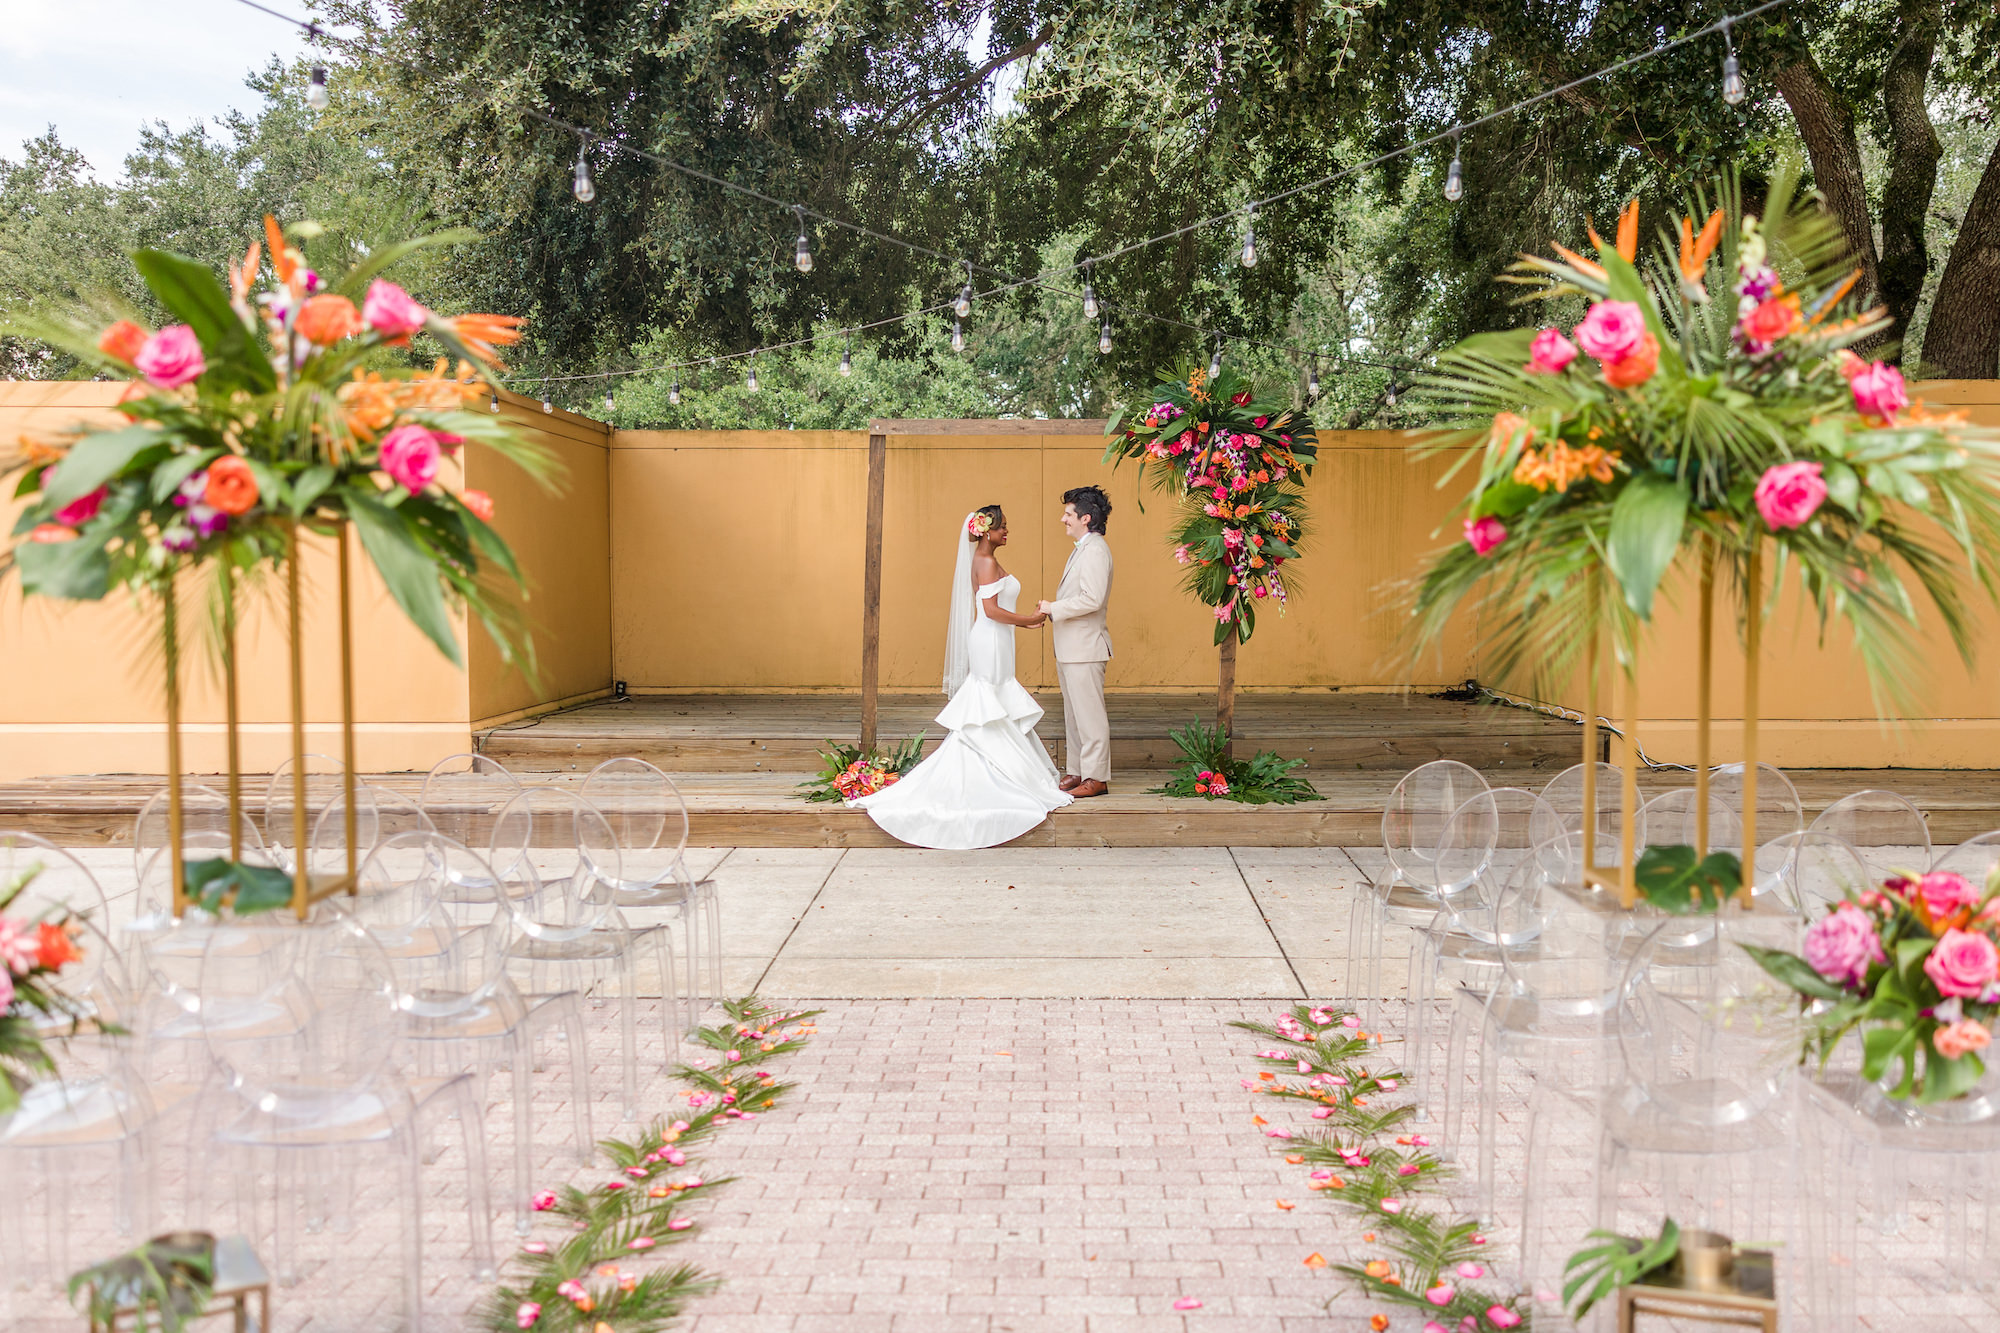 Pink and Orange Tropical Outdoor Courtyard Wedding Ceremony | Acrylic Oval Ghost Chairs | Tampa Bay Rental A Chair Affair | Wedding Venue Tampa Palms Golf & Country Club | Wedding Planner Kelci Leigh Events | Florist Save the Date Florida